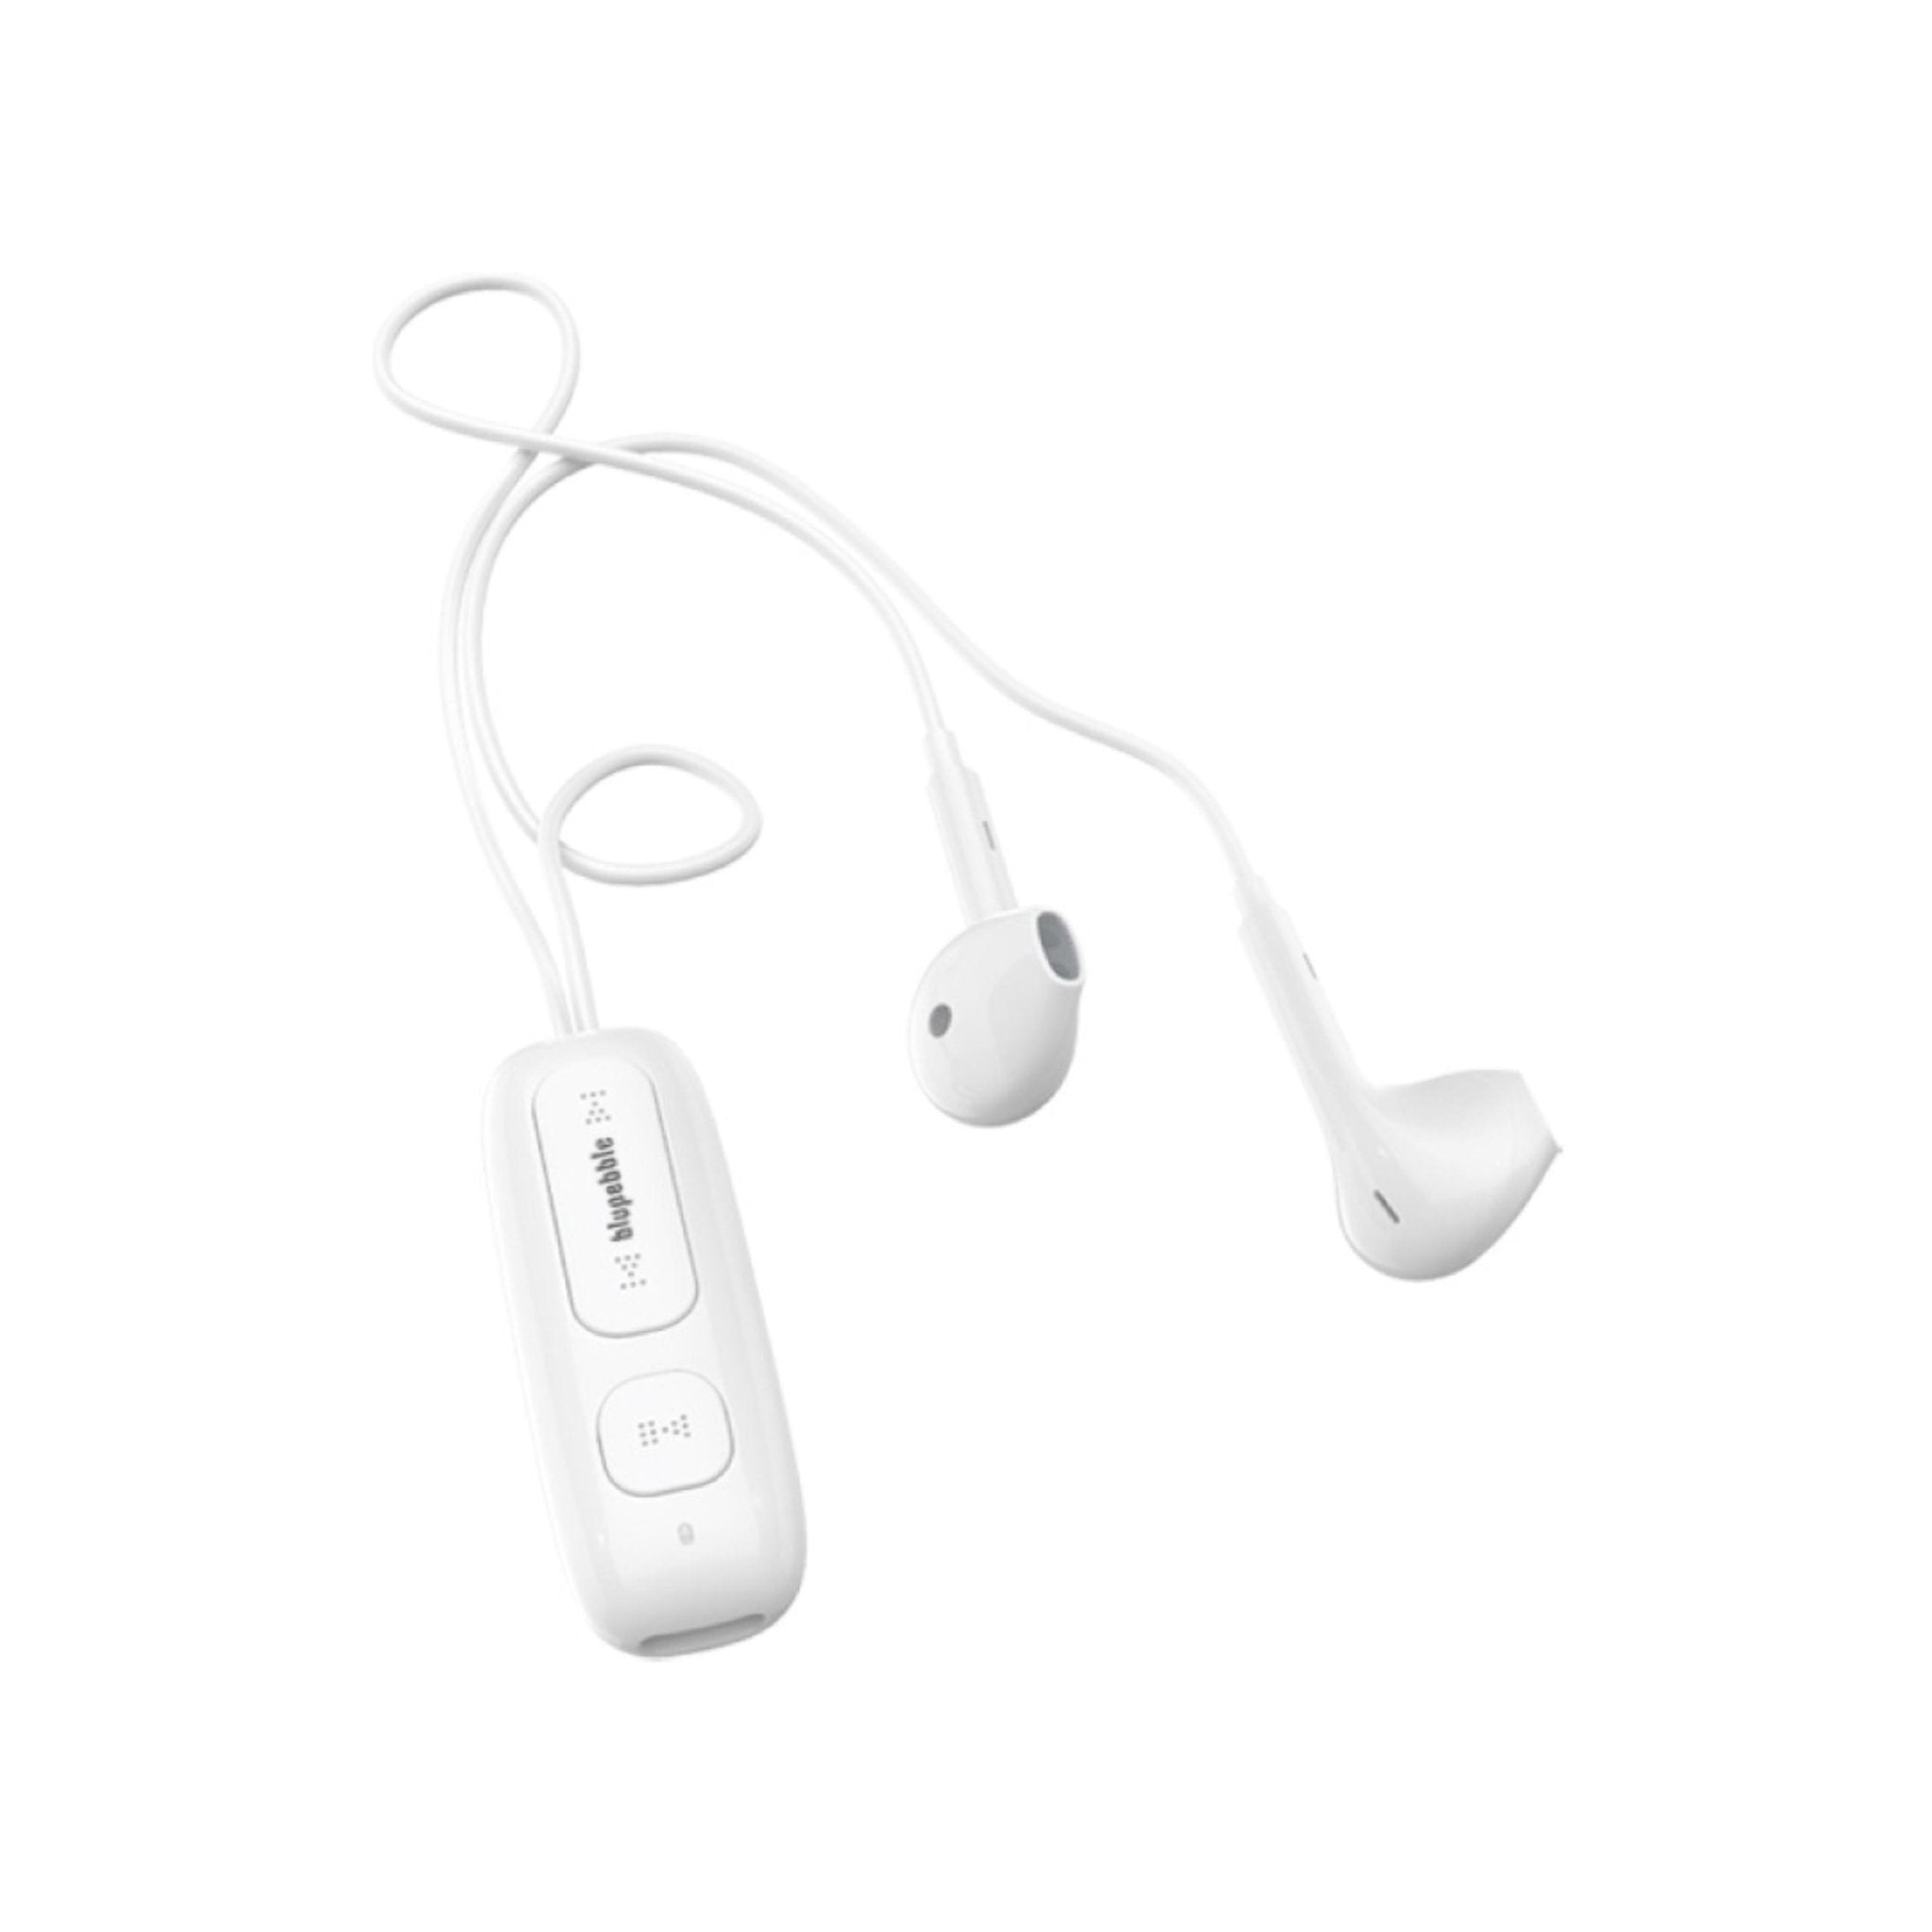 Blupebble BT Clip Wireless Earphone With Ultra-Long Battery LIFE - White